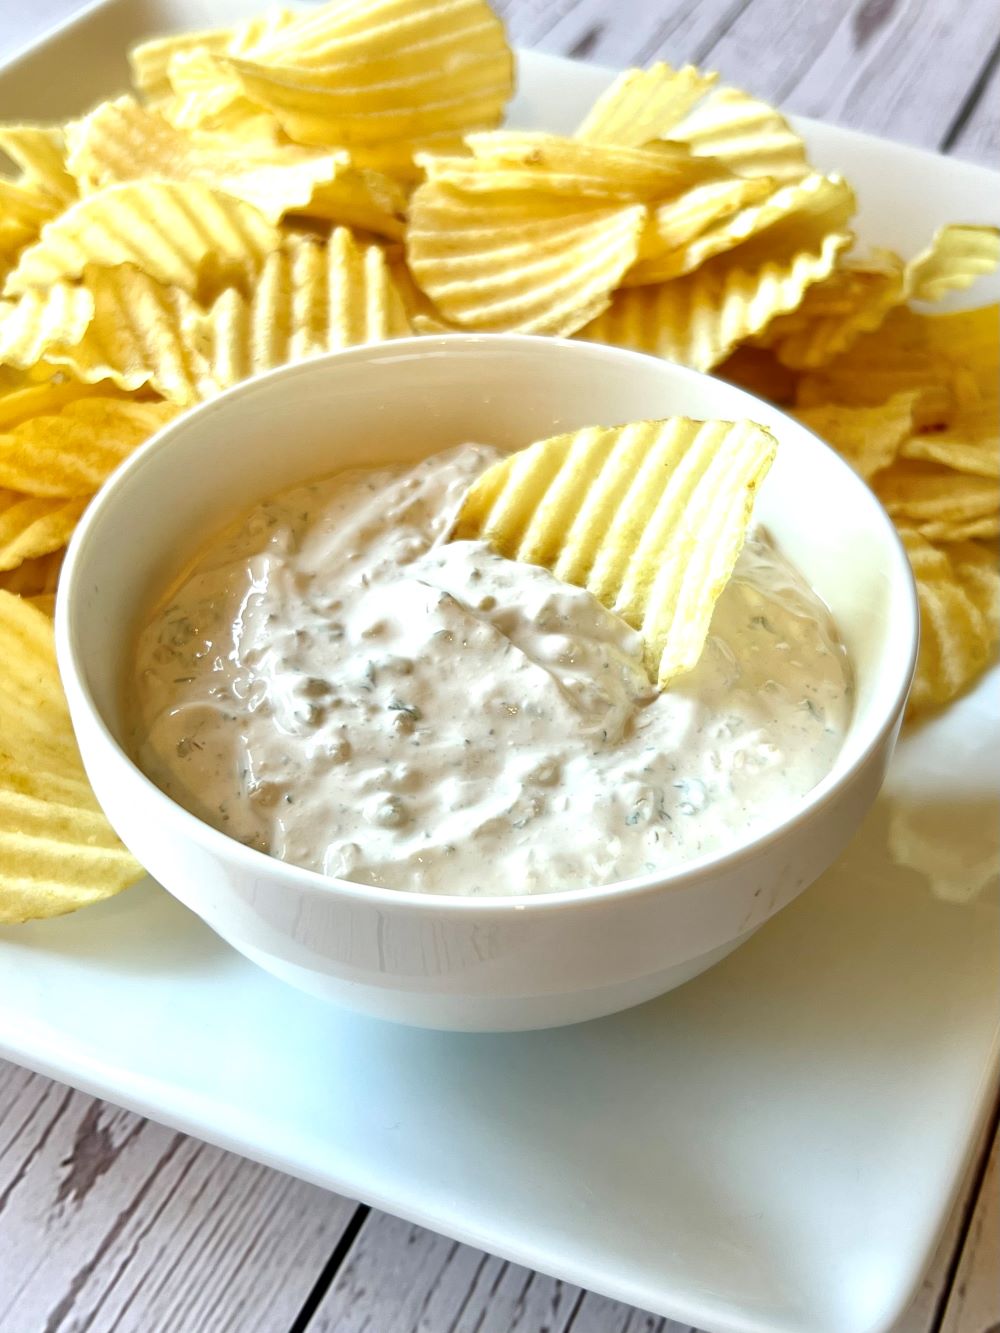 Plate with potato chips and chip dipped in French onion dip